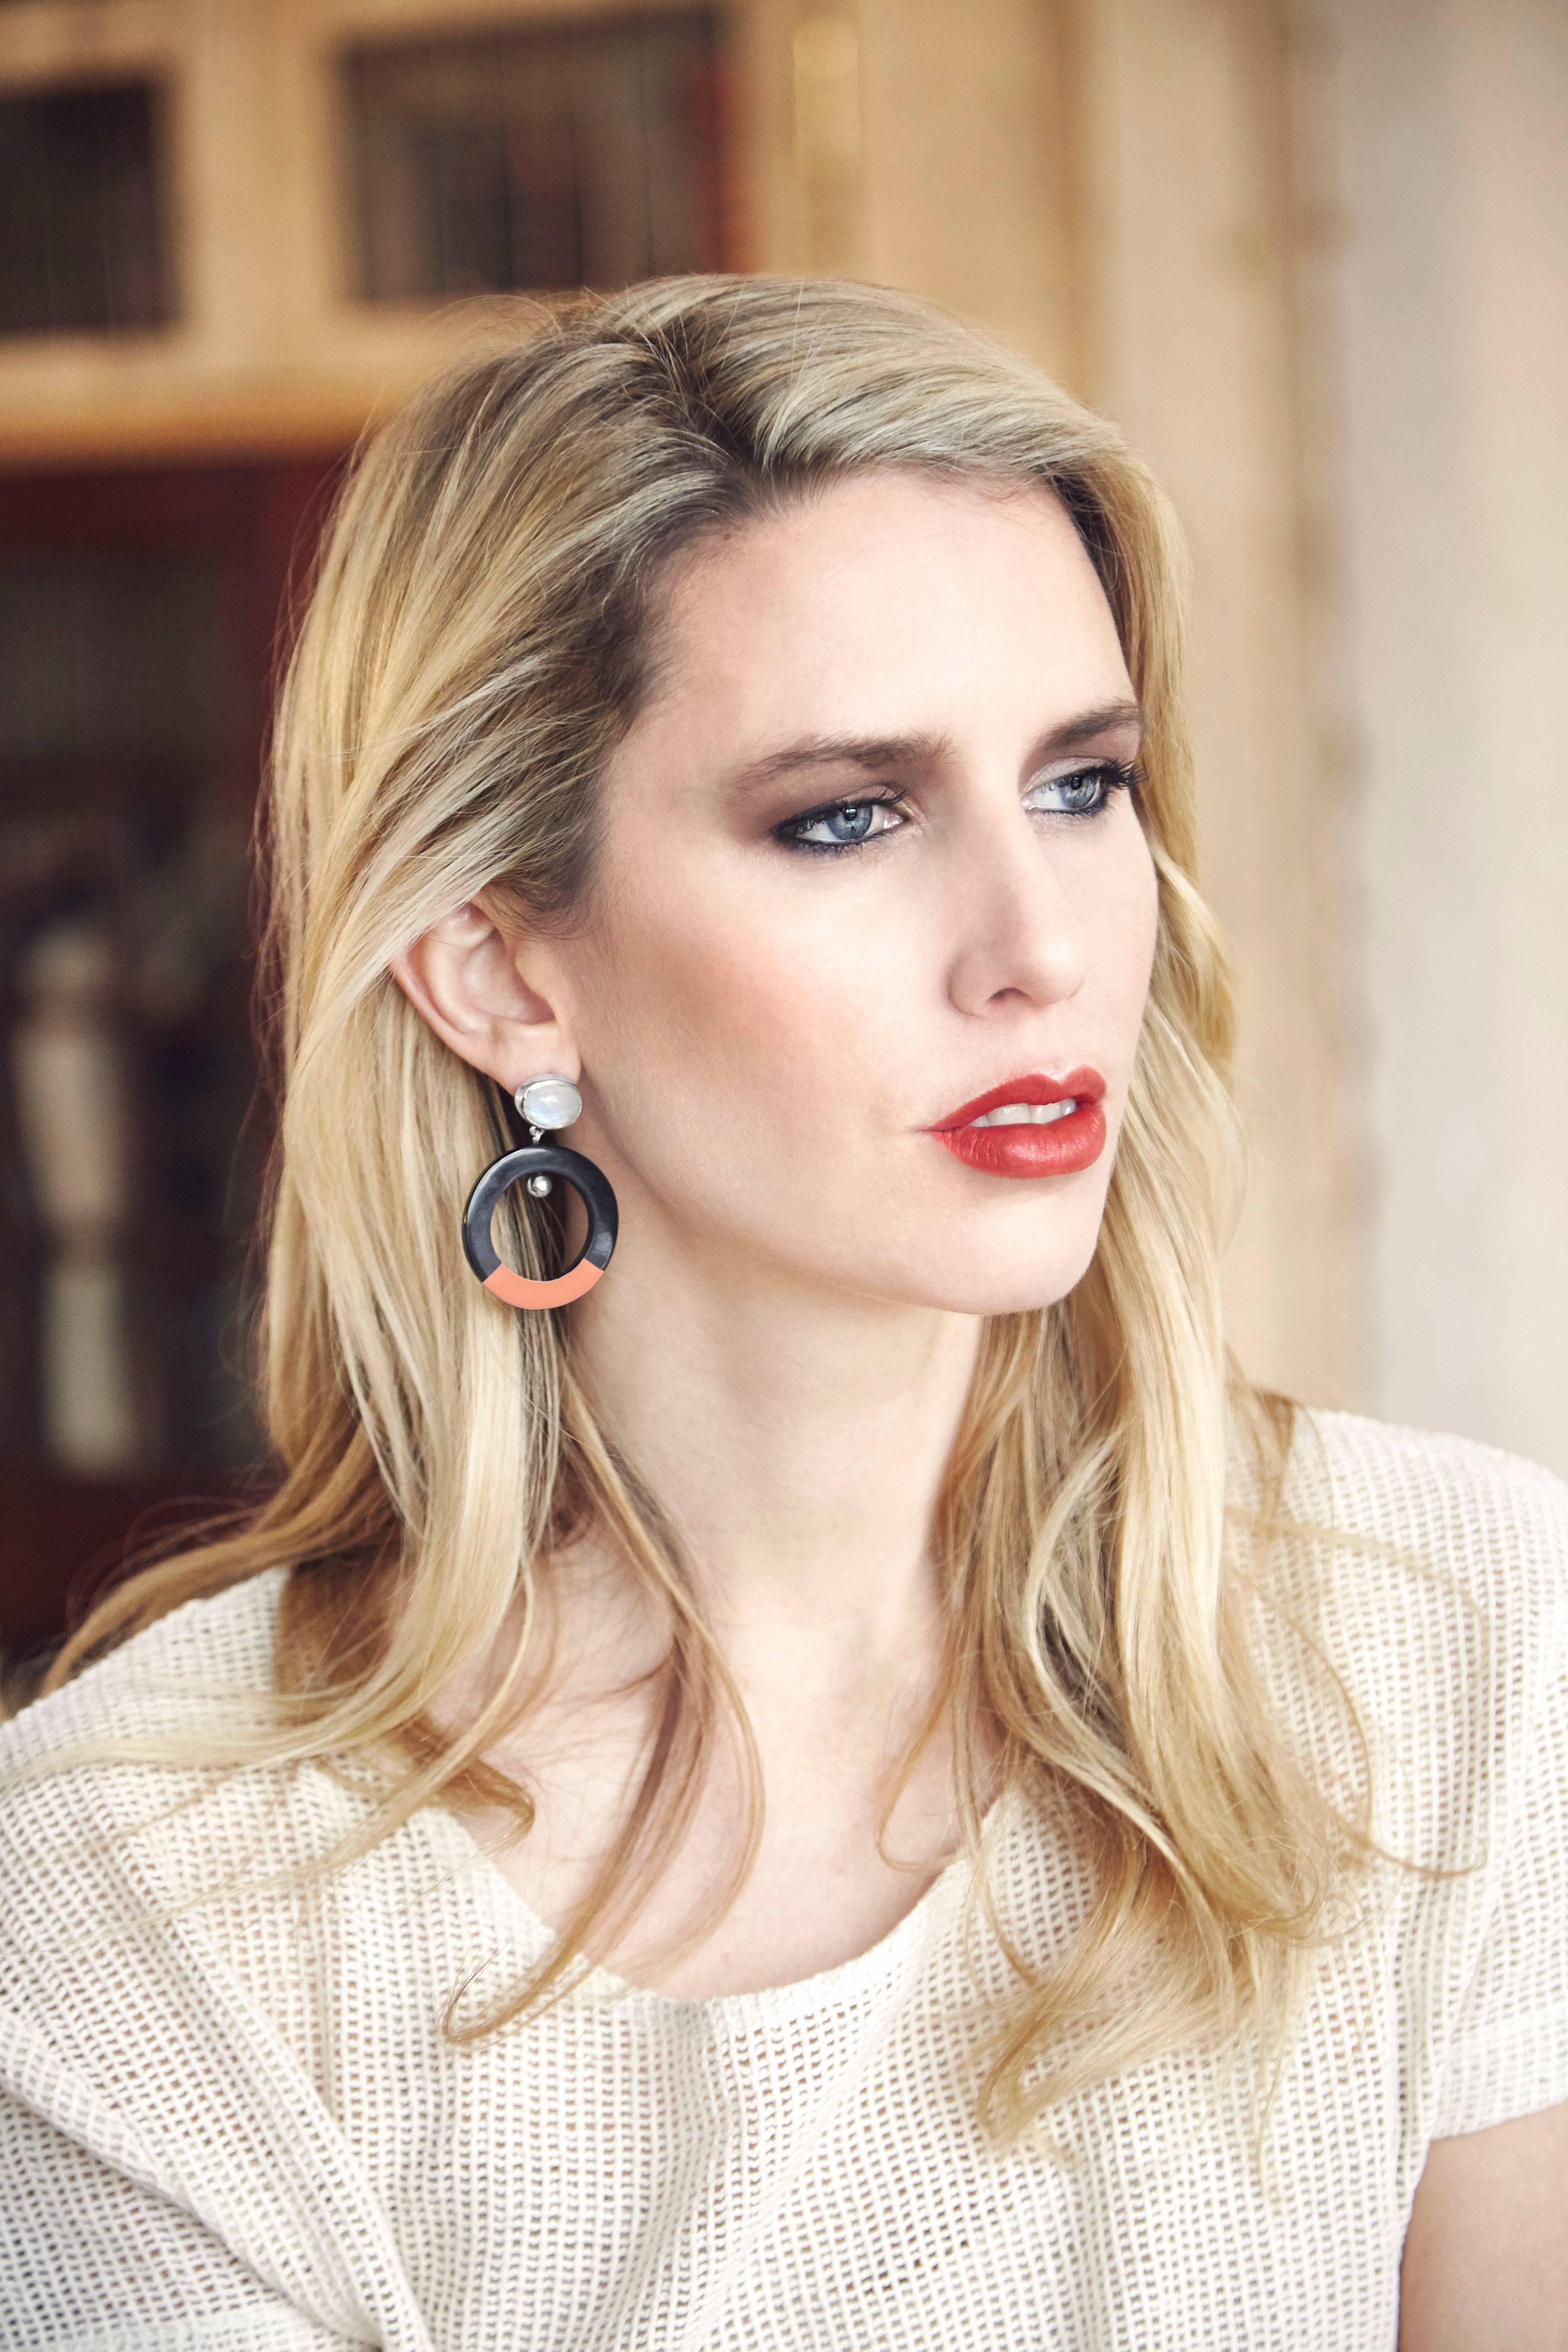 Earrings crafted from African moonstone and cow horn with hand painted coral lacquer enamel. 

Handmade in London from natural materials with silver pin-backs for pierced ears; ready to ship within 2-3 weeks. Please note that slight horn graining